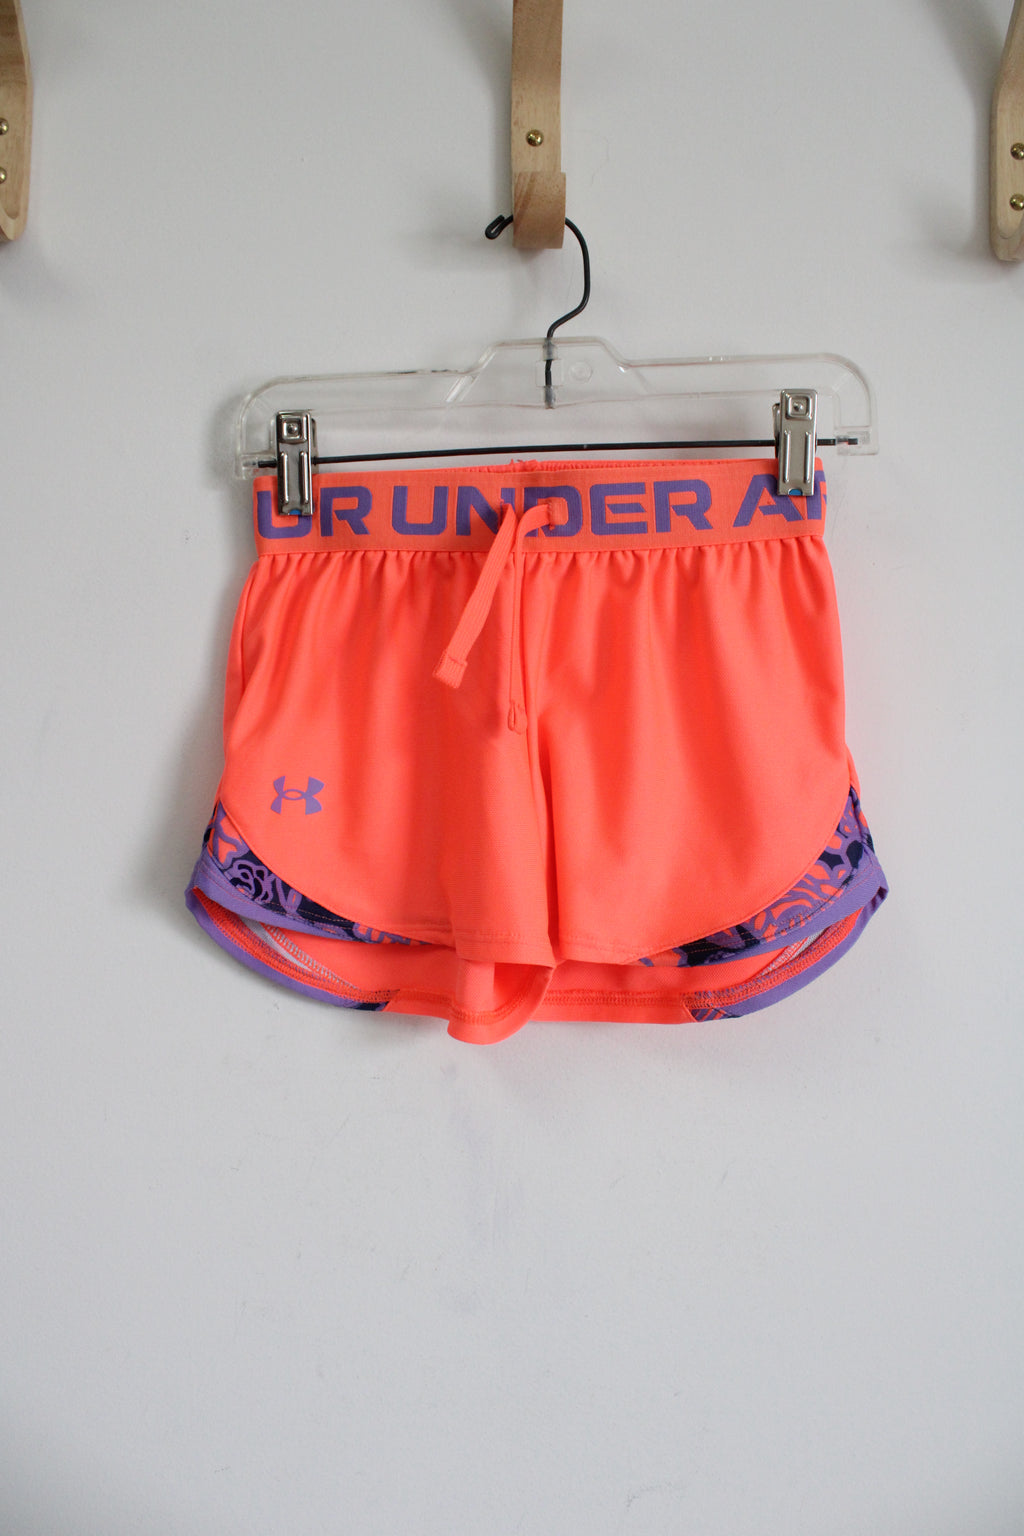 Under Armour Neon Orange Purple Athletic Shorts | Youth S (8)